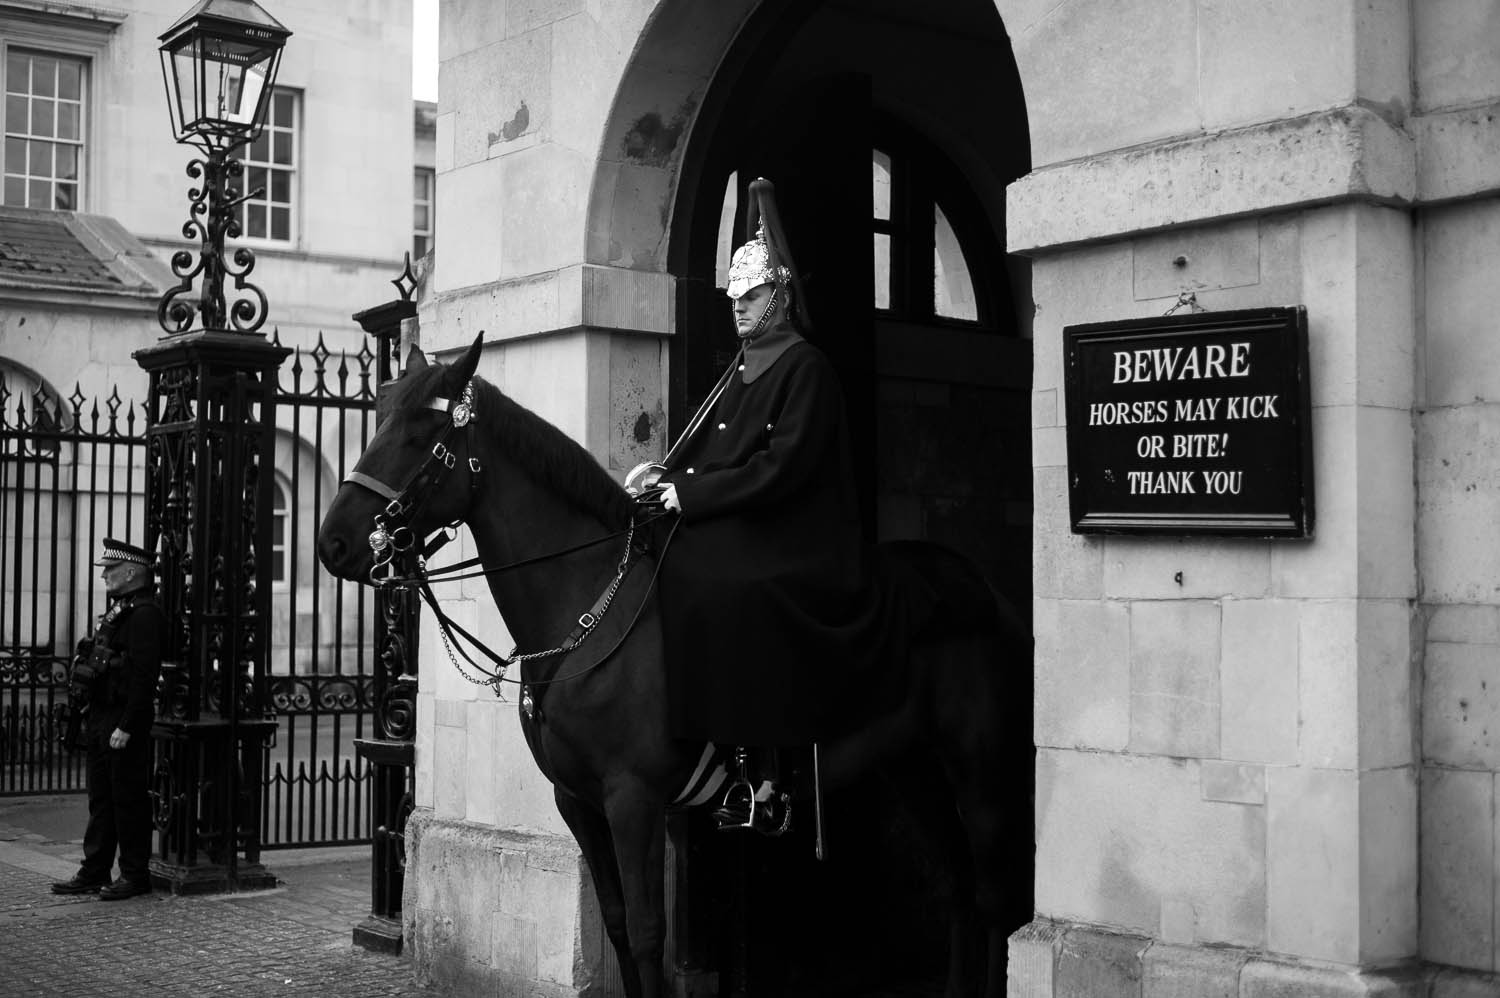 An officer seated on horseback in London